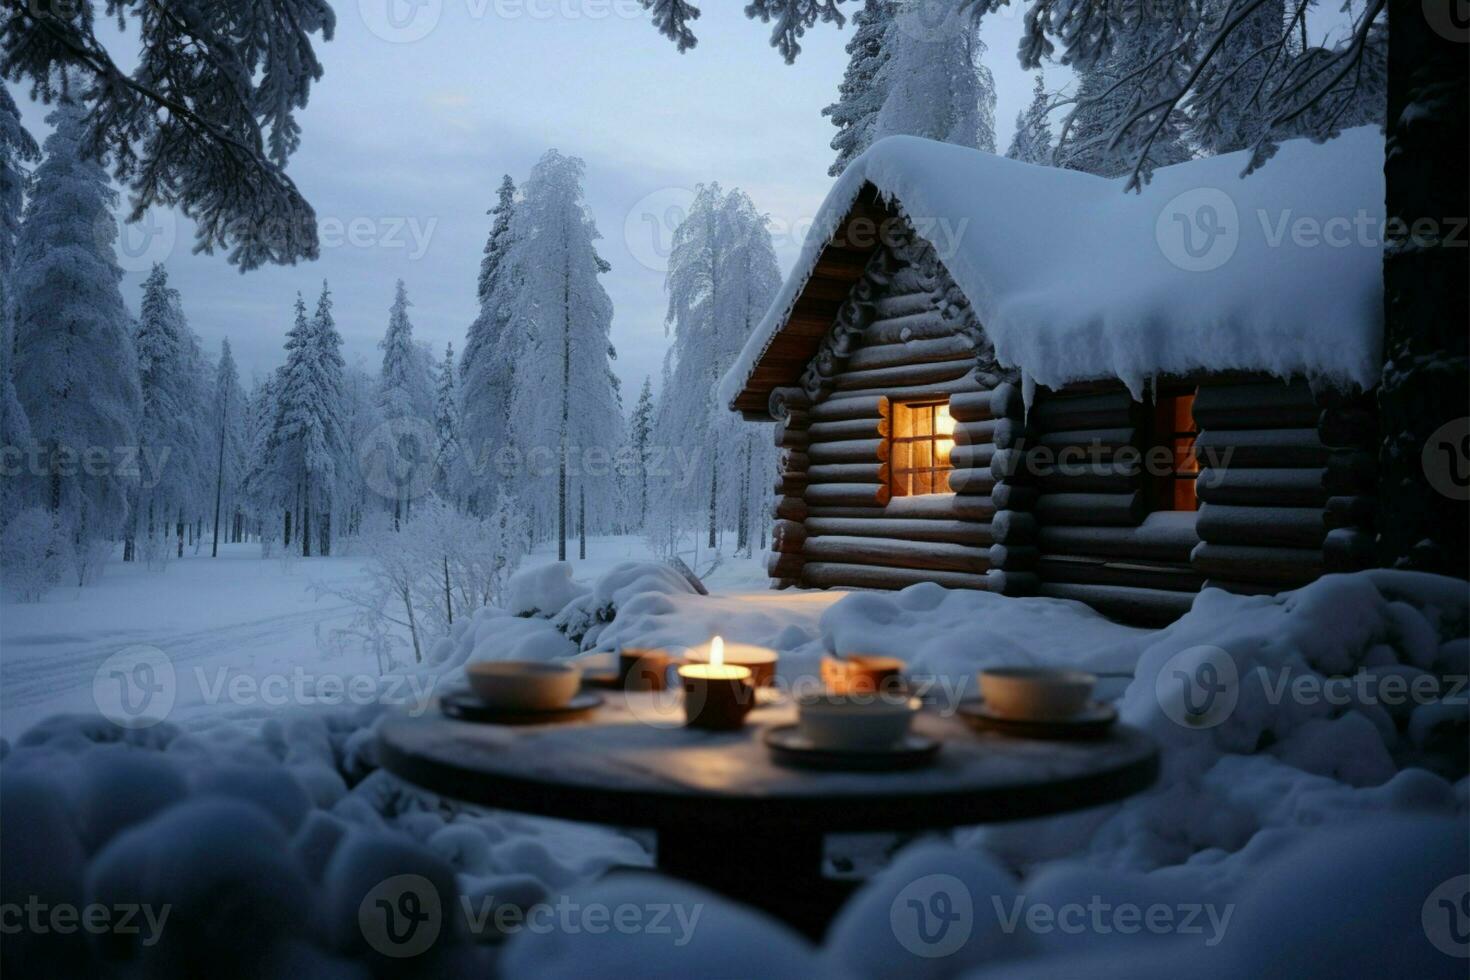 A snowy scene complements Finnish Karelian pies, inviting cozy indulgence AI Generated photo